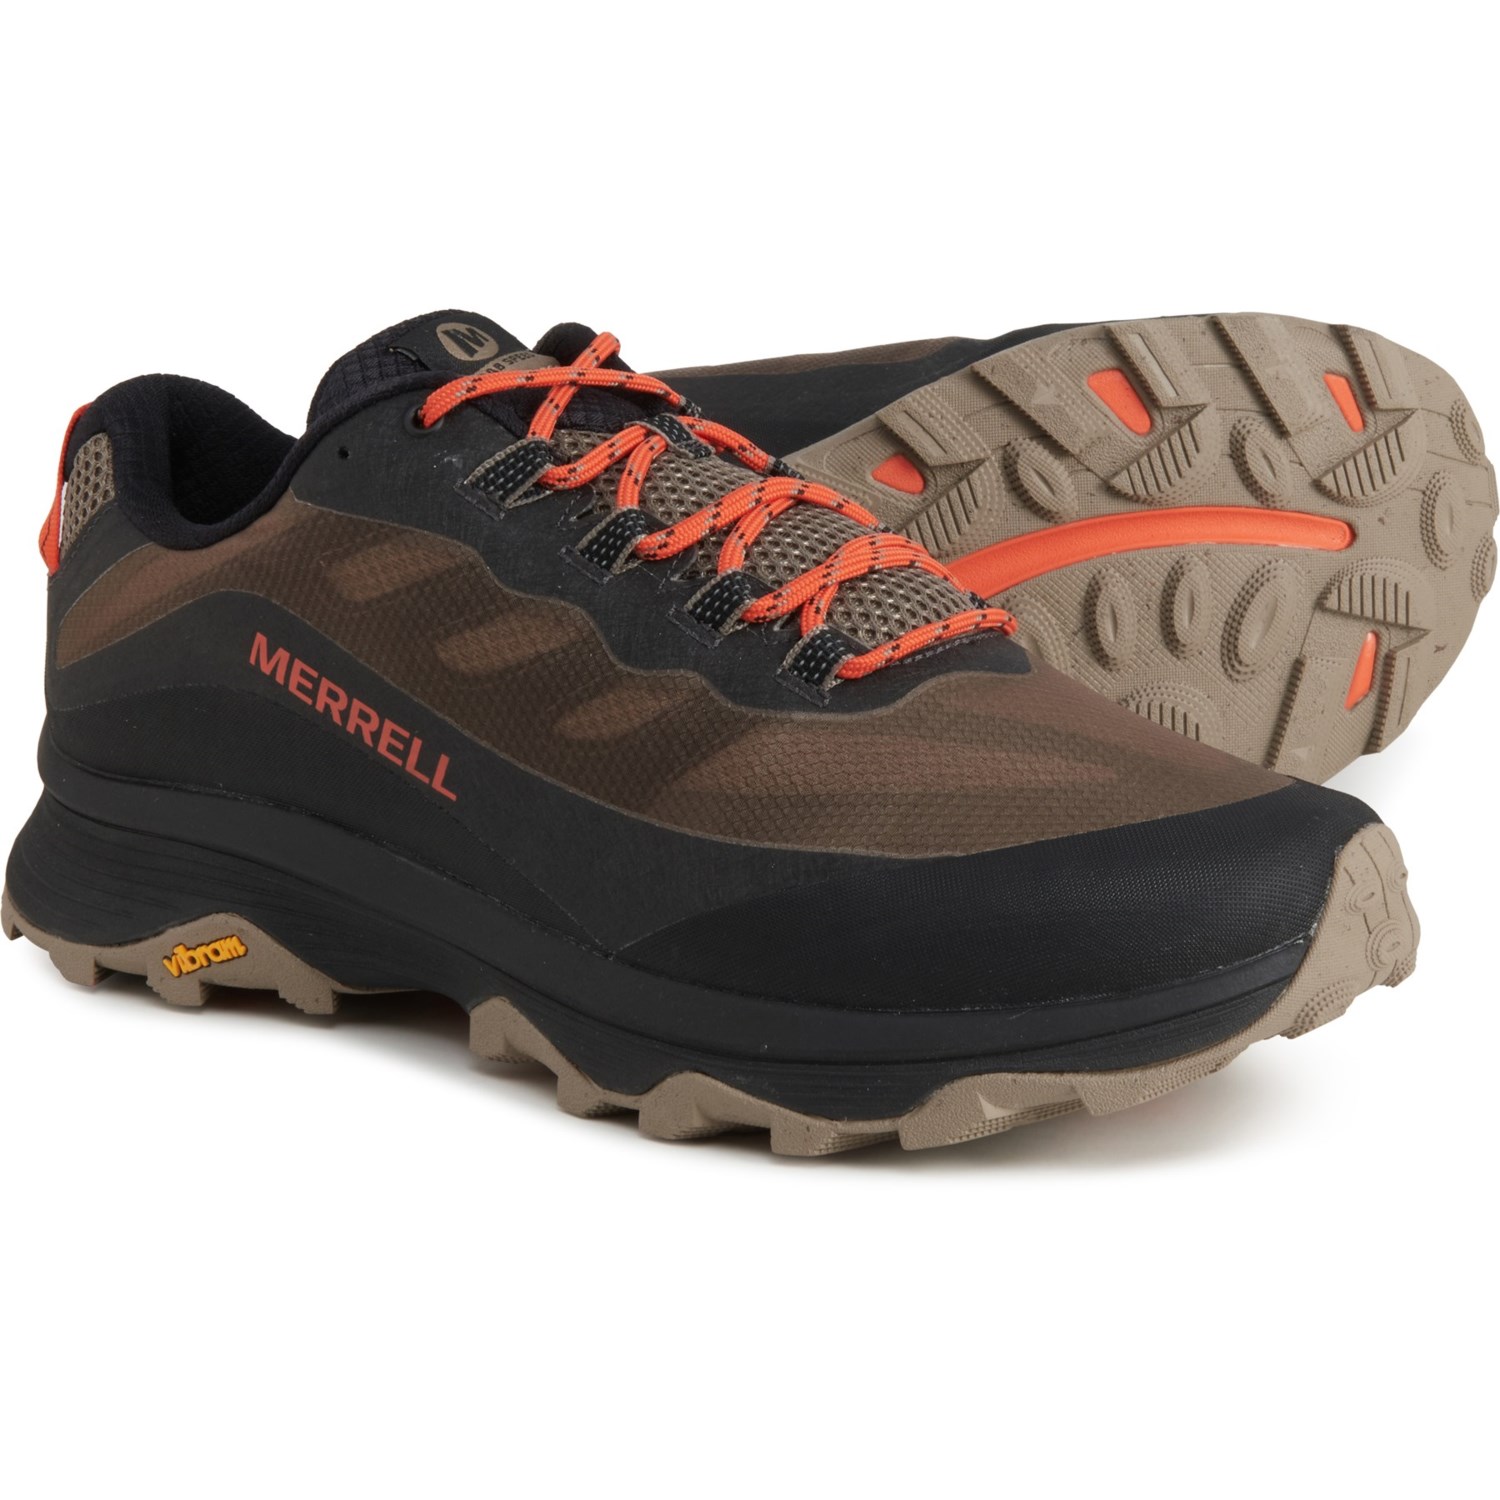 Merrell Moab Speed Hiking Shoes (For Men) - Save 40%